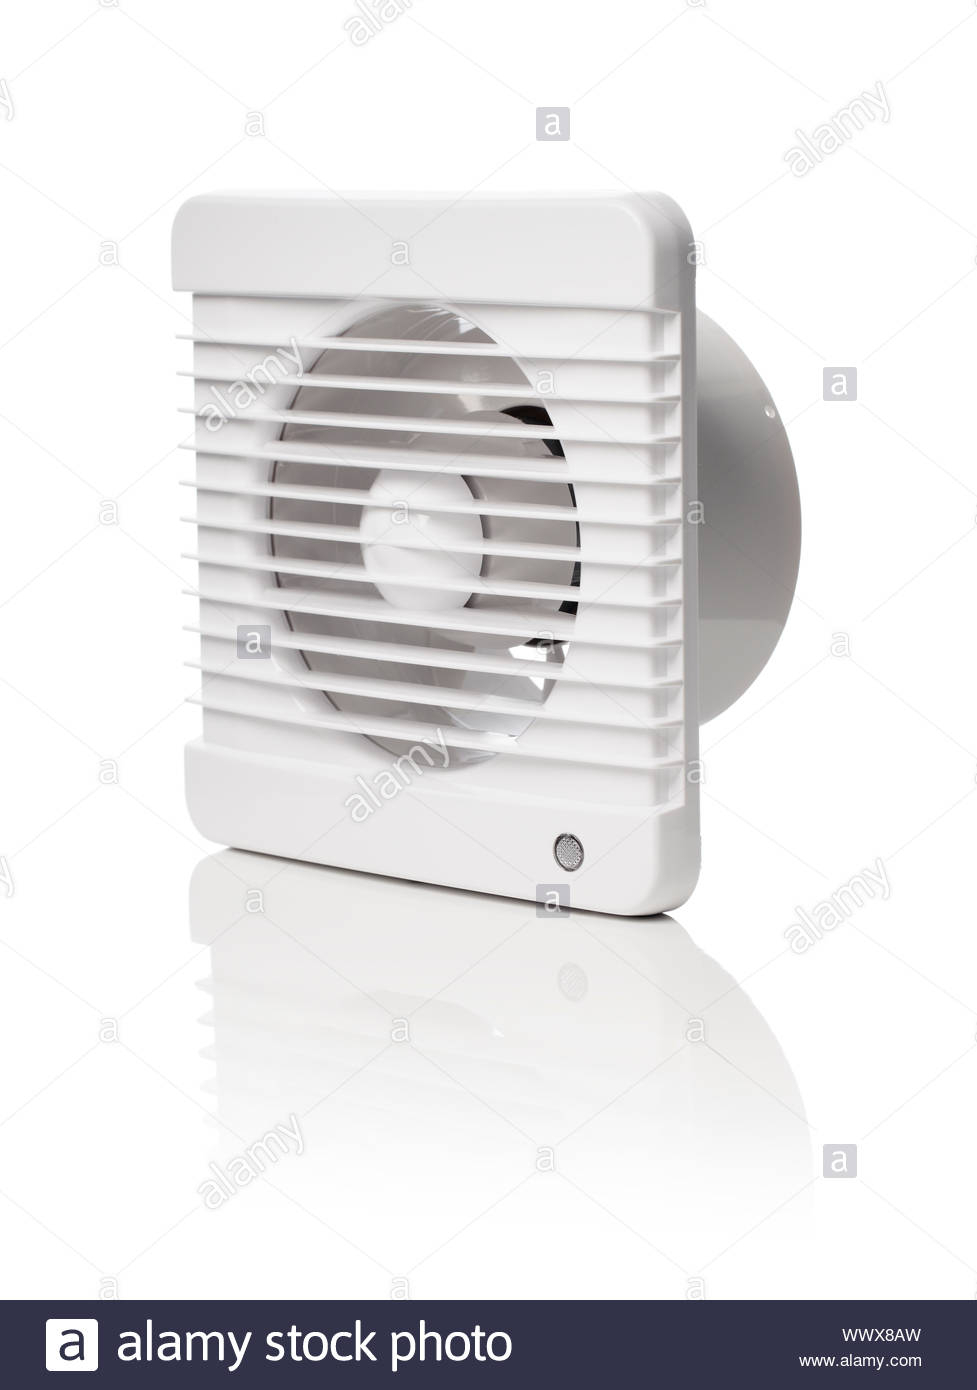 Bathroom Fan Cut Out Stock Images Pictures Alamy throughout size 977 X 1390